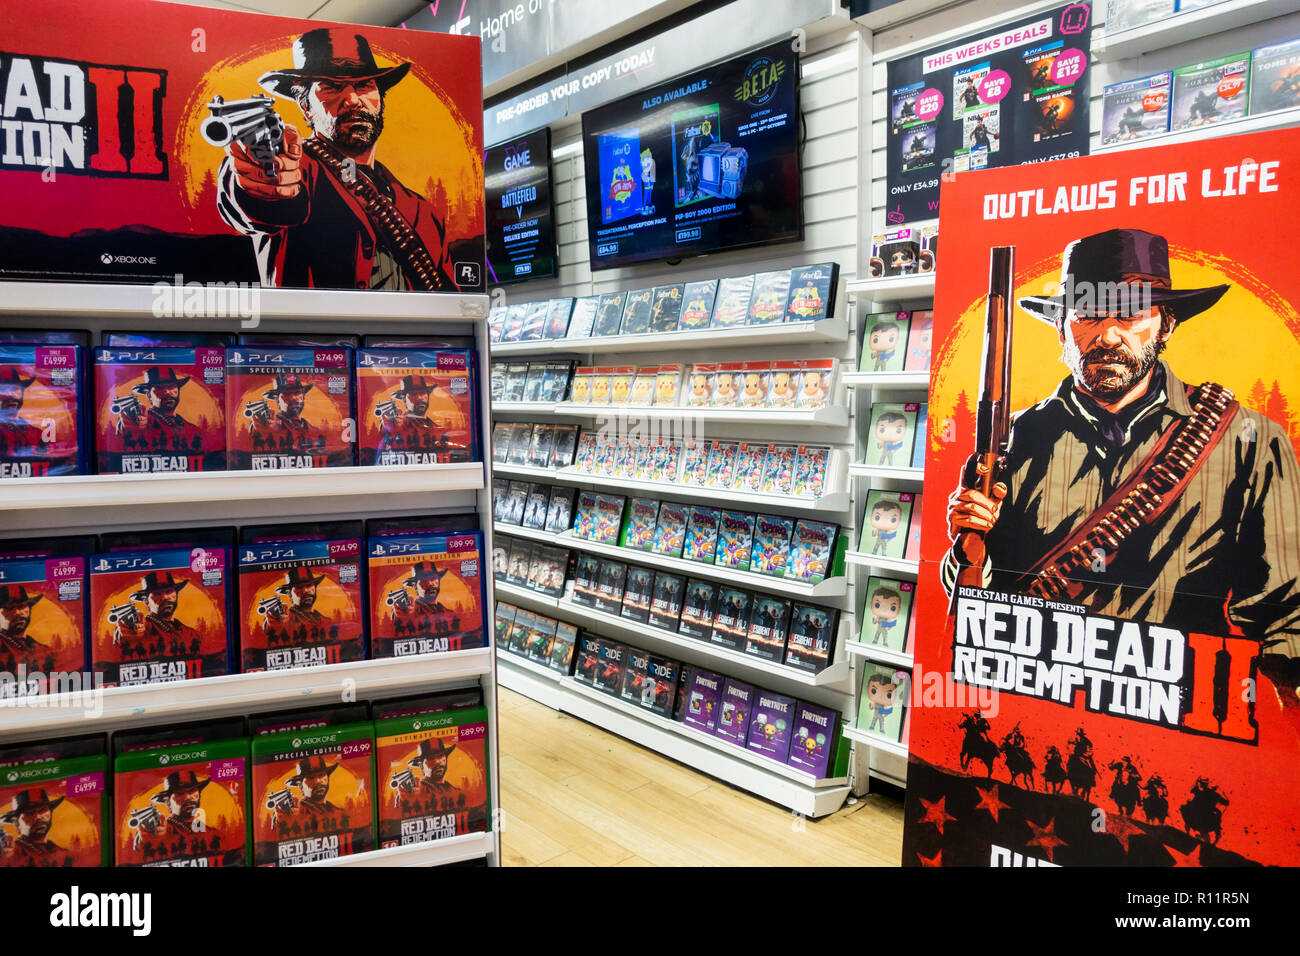 Red Dead Redemption 11 in gaming store shortly after release date. Stock Photo